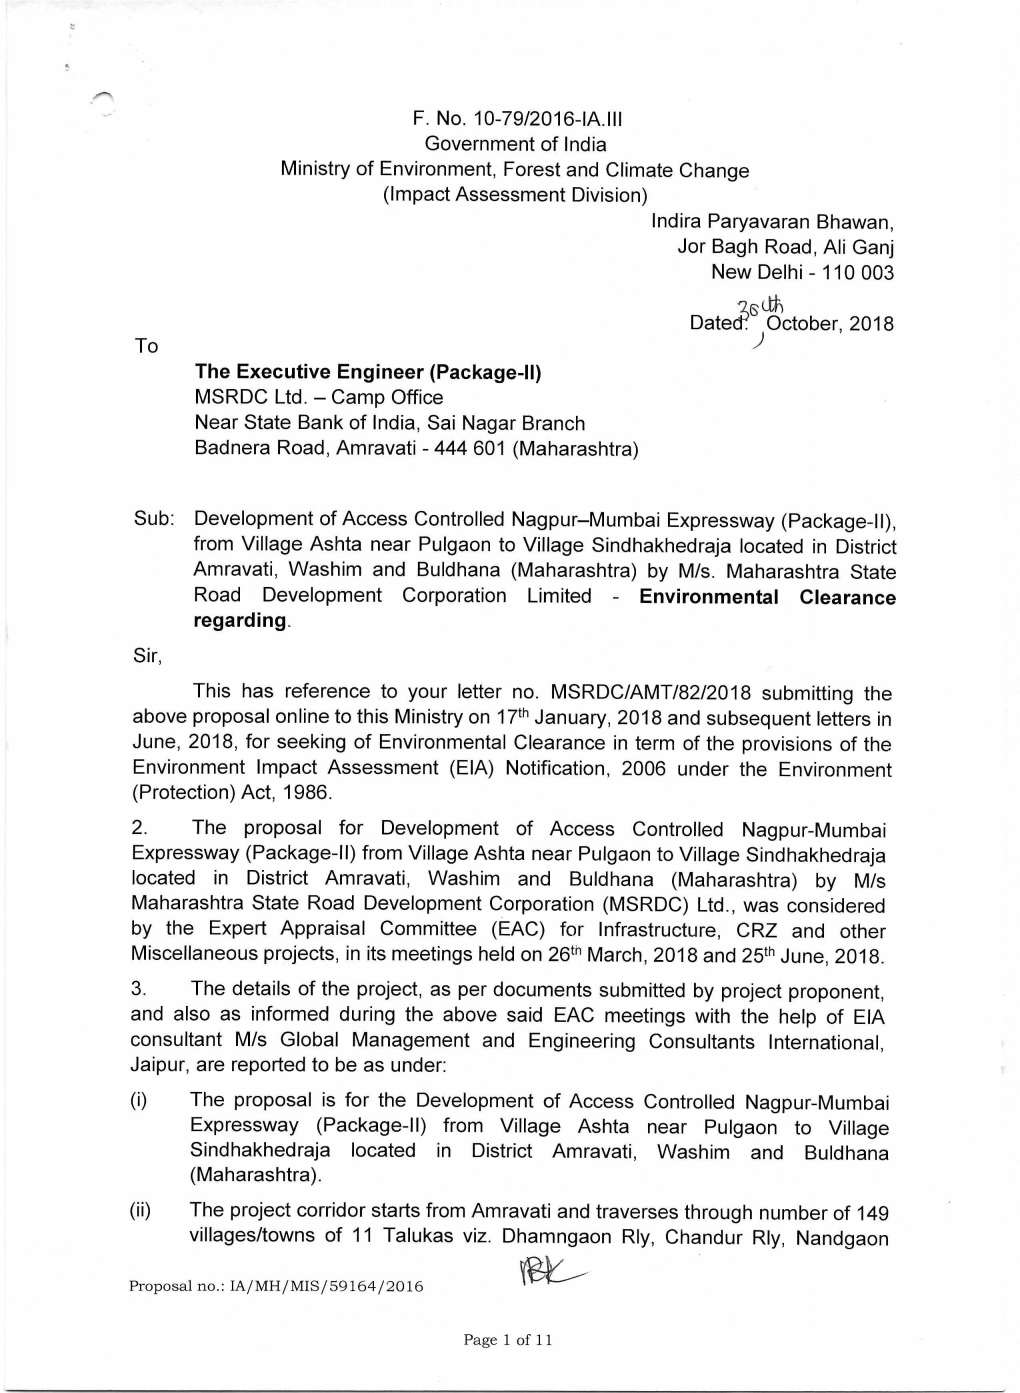 F. No. 10-79/2016-IA.III Government of India Ministry of Environment